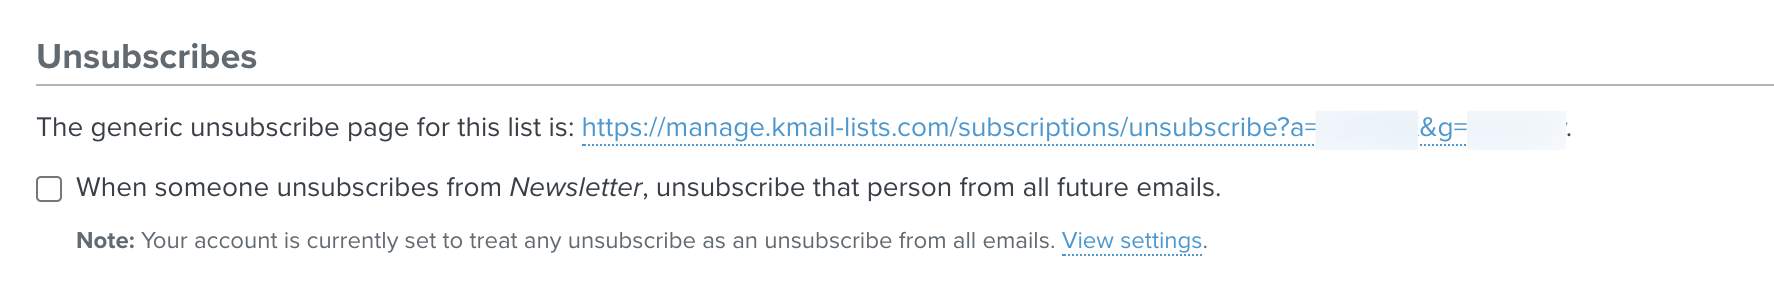 Turn_of_global_unsubscribes_for_a_list.png